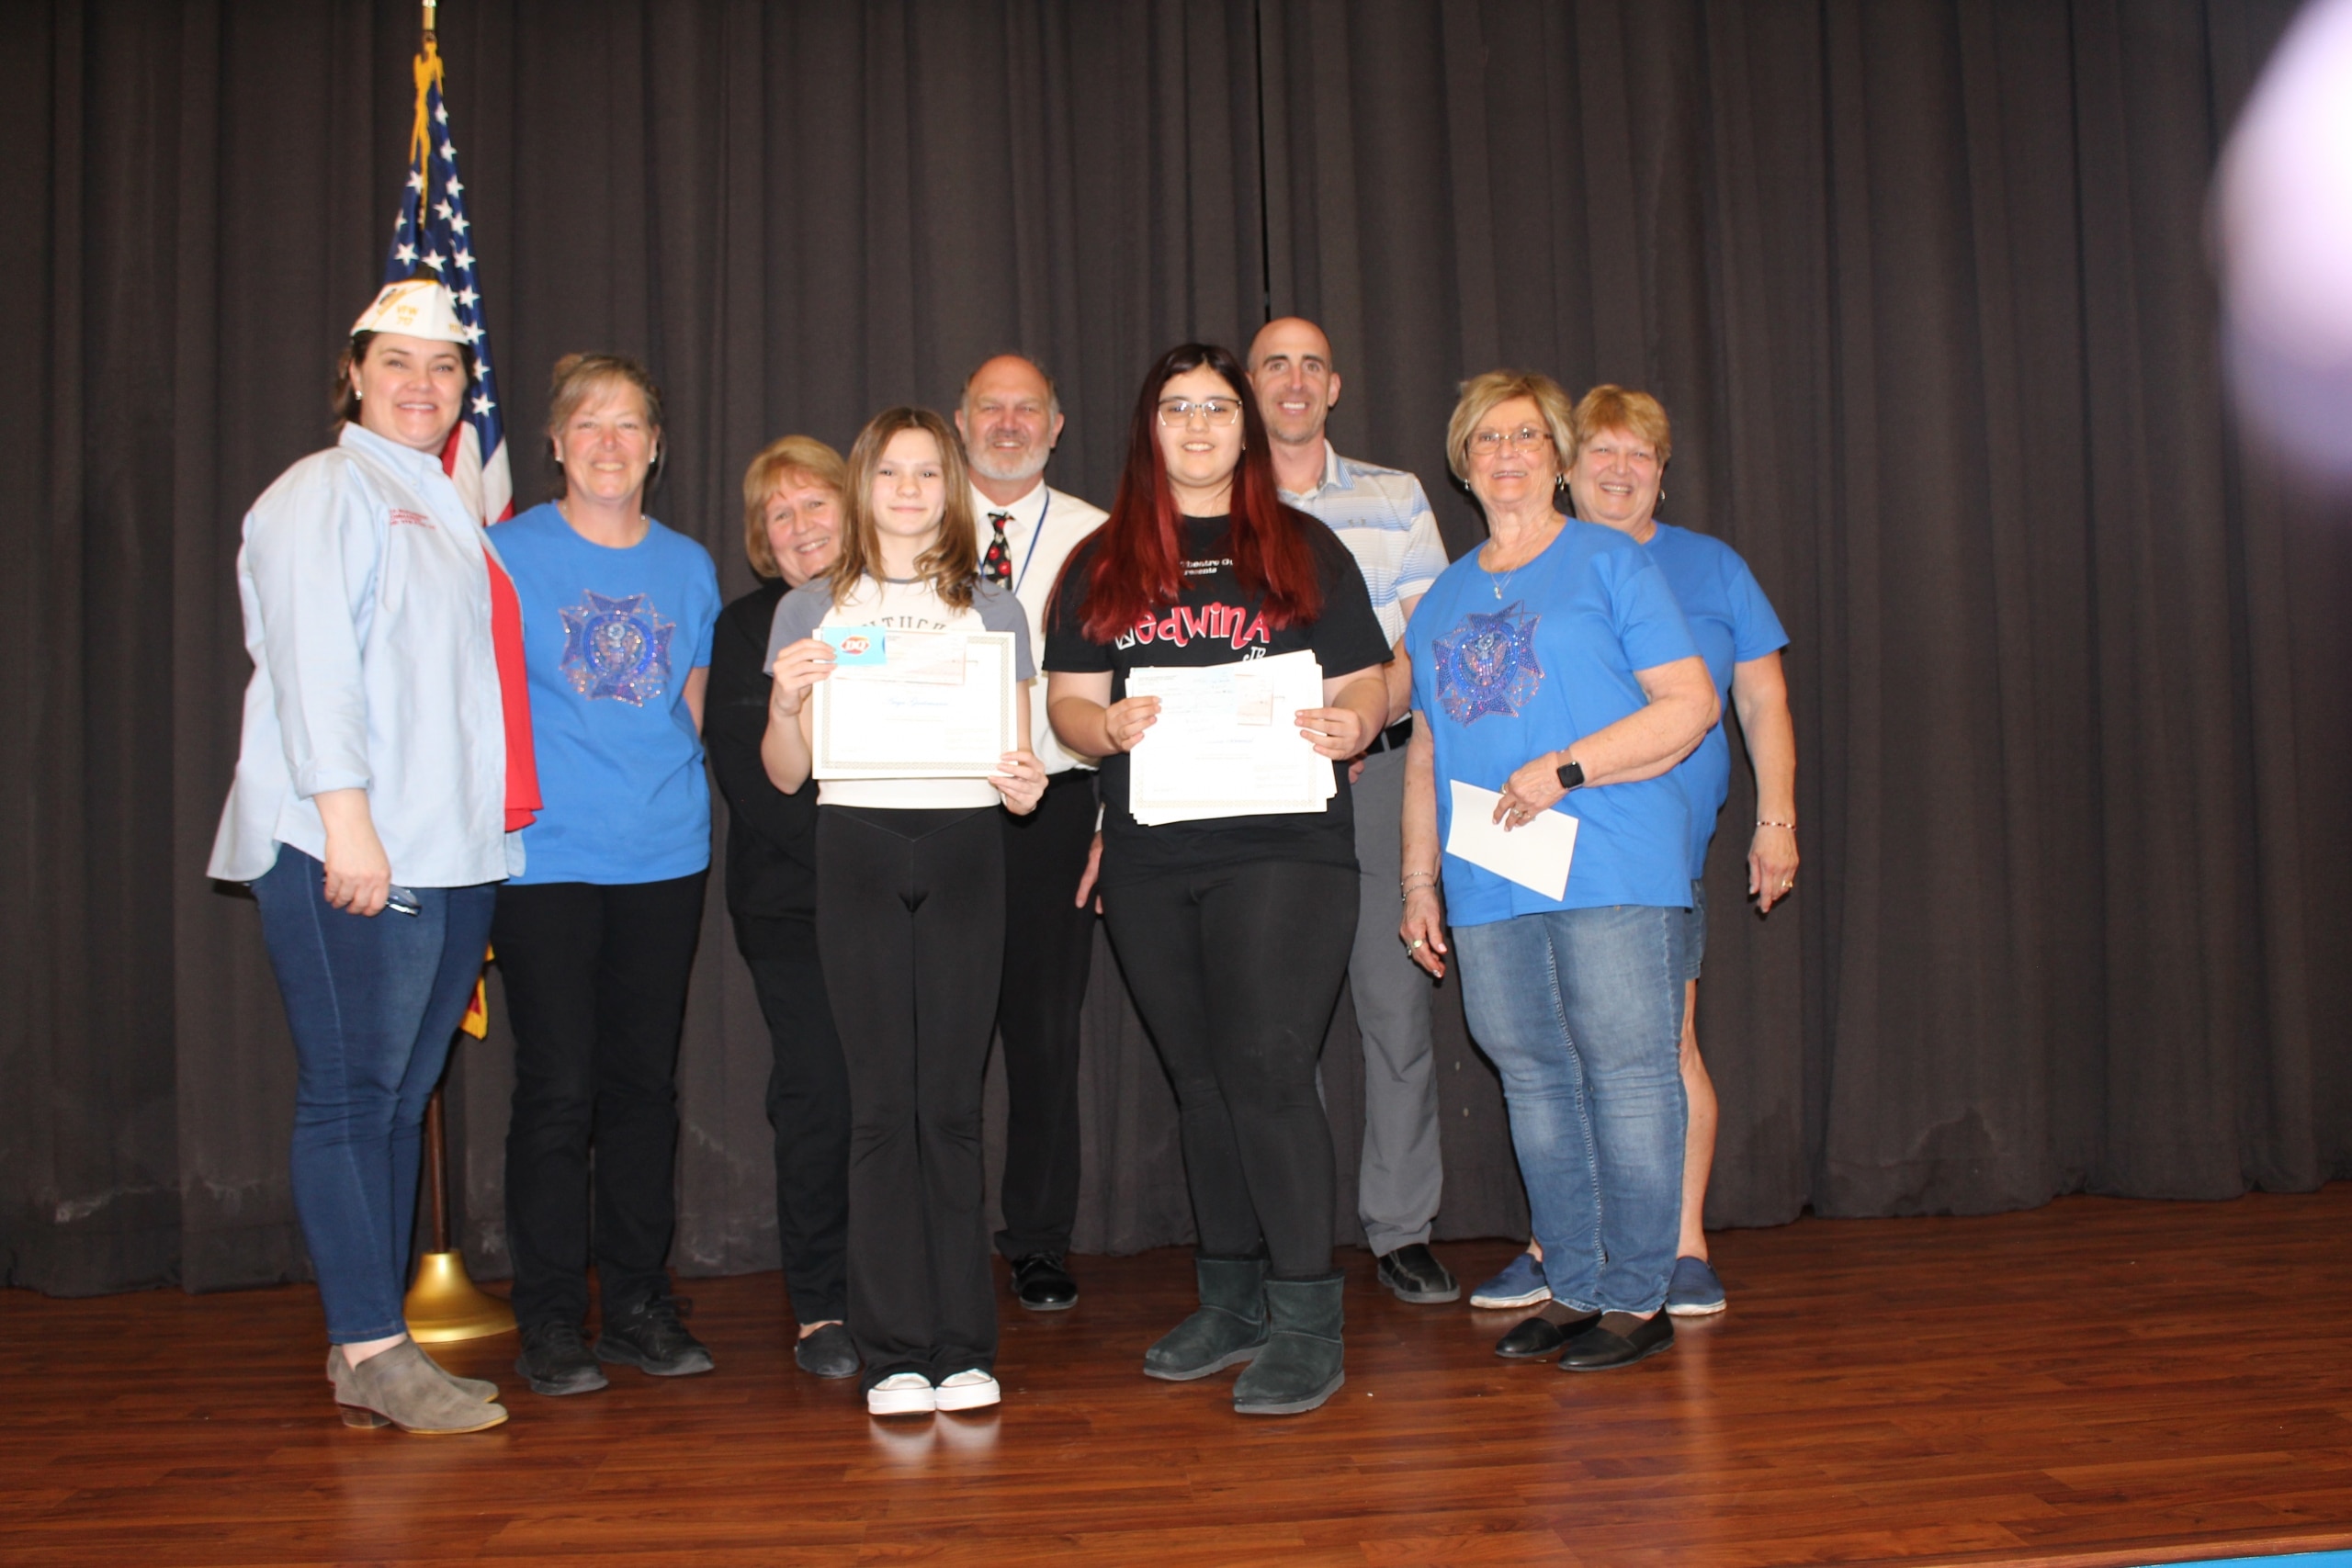 Clark had two winners of the VFW Essay contest. Natalia Bernal(7th) won at the local and district level. Anya Giedemann(6th) won at the local level. Both students were recipients of monetary gifts and gift cards. Clark is very proud of them both!